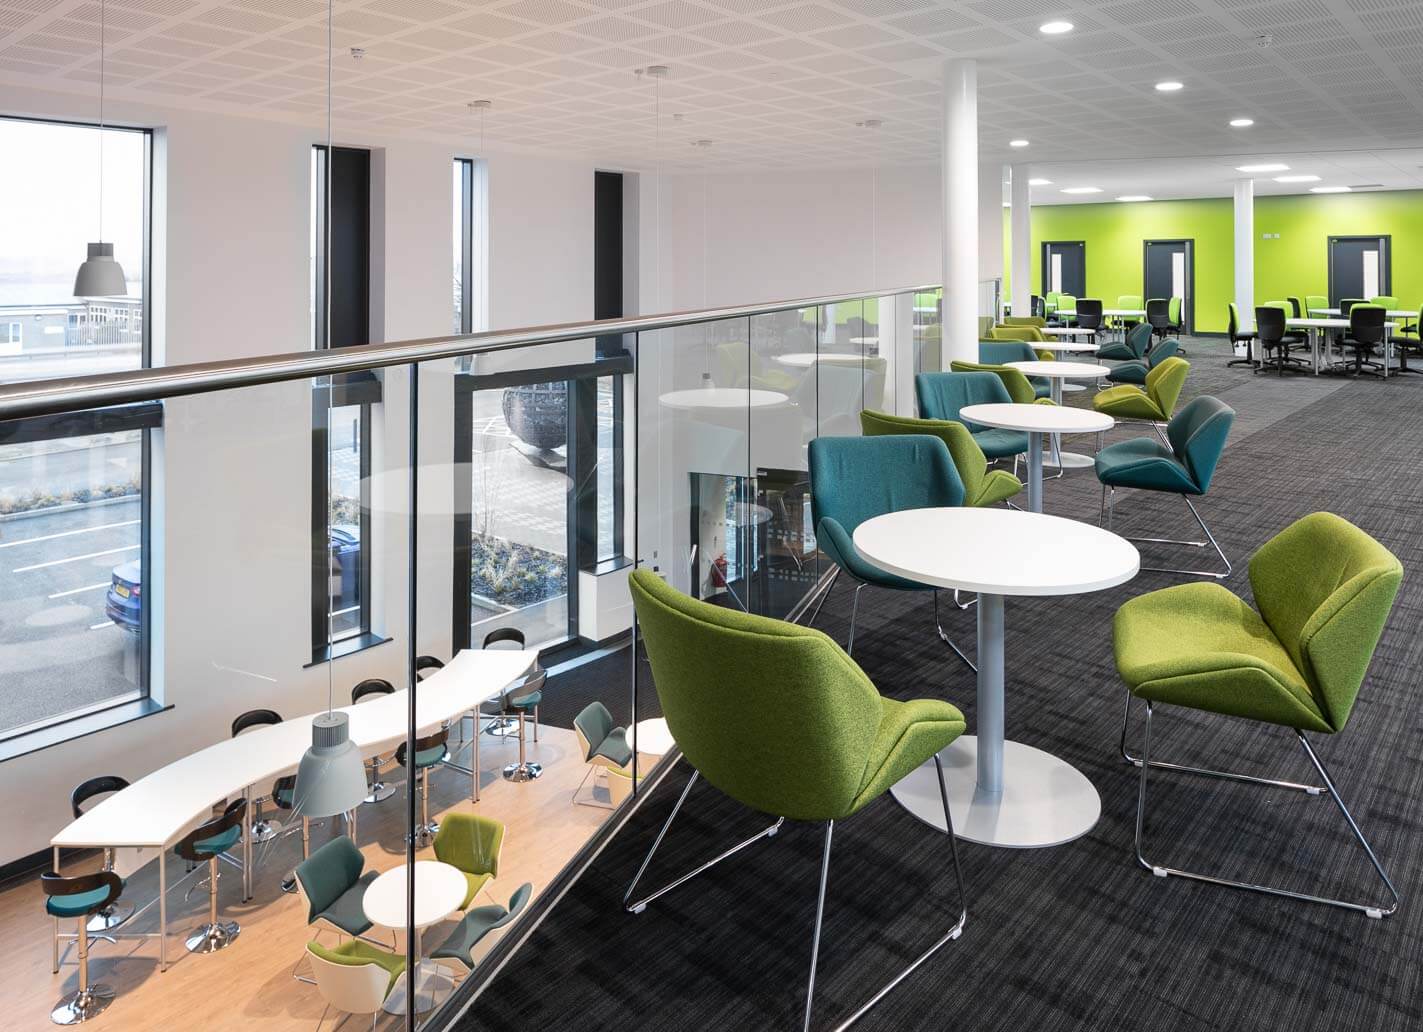 Interior furniture photography - National College for Nuclear at Lakes College, Workington